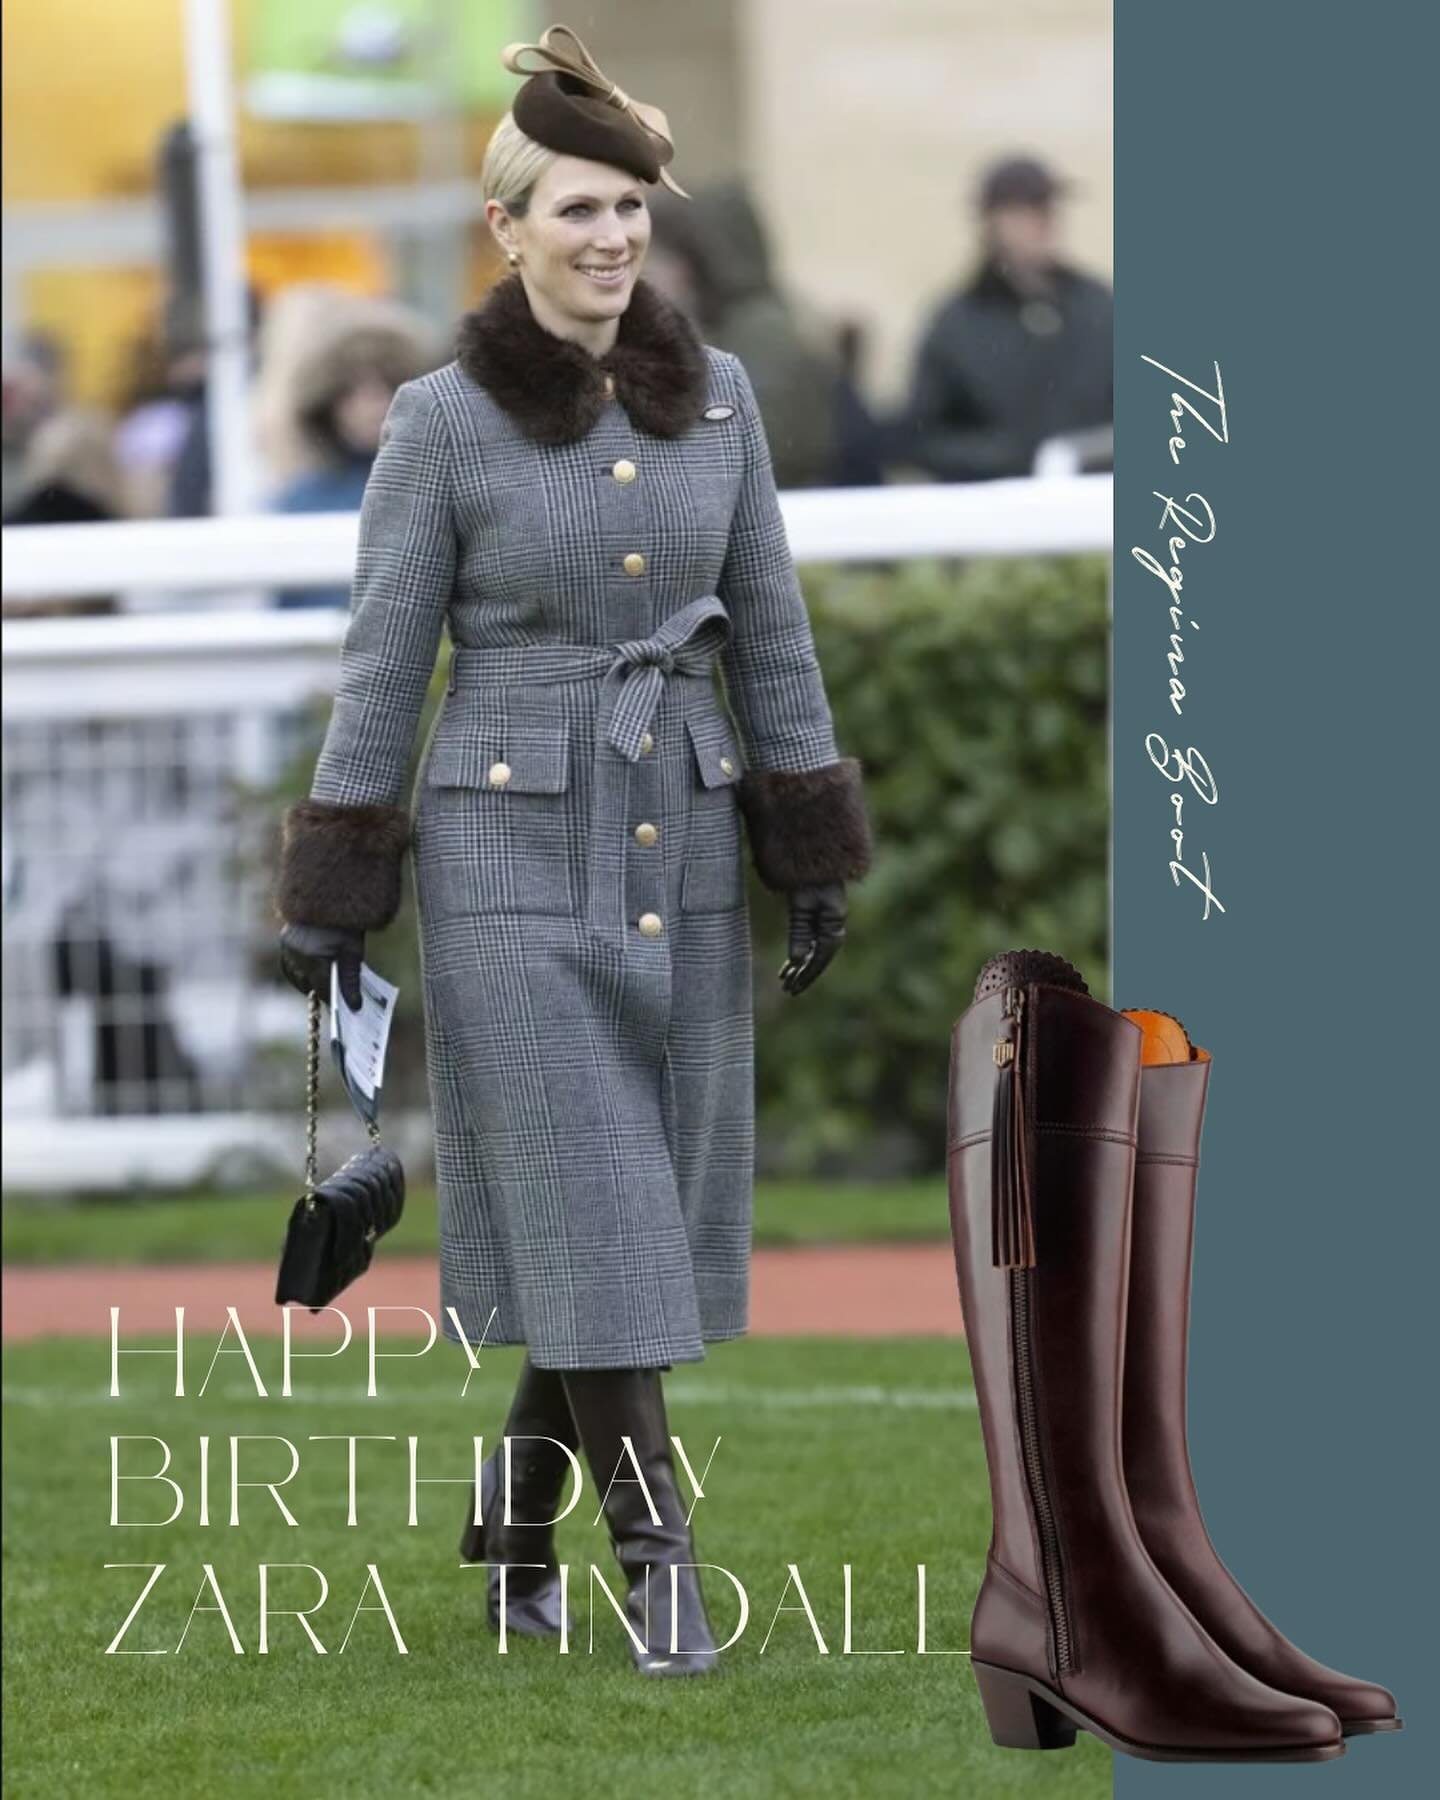 Happy Birthday Zara🎈

To celebrate the Royal&rsquo;s special day, the Bloxham team have picked out some of their favourite Fairfax &amp; Favor looks she has styled over the years &ndash; with help from the talented @anniemiallstyling!

From left to 